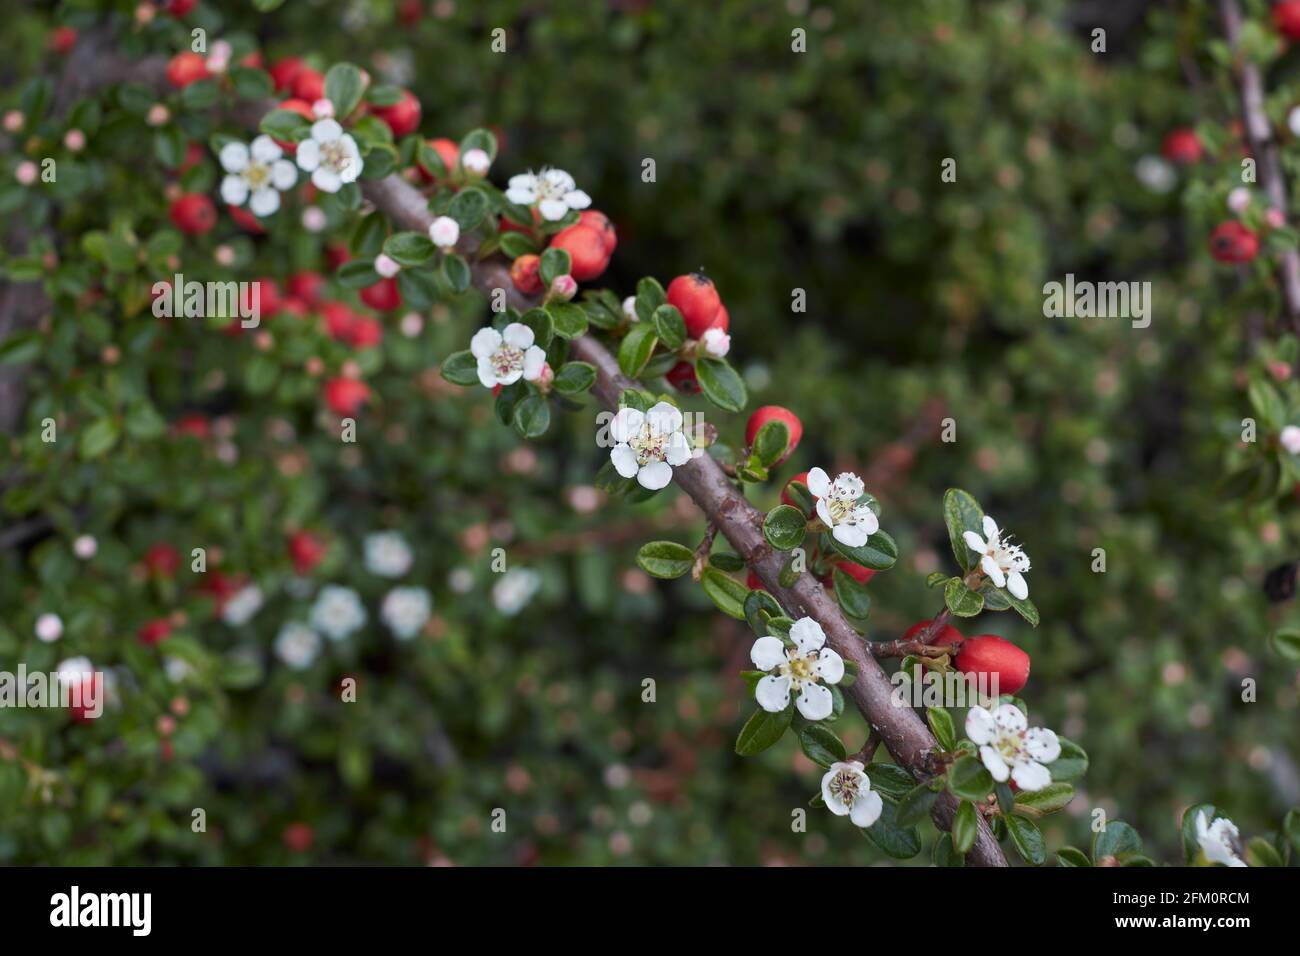 Cotoneaster microphyllus shrub in bloom Stock Photo